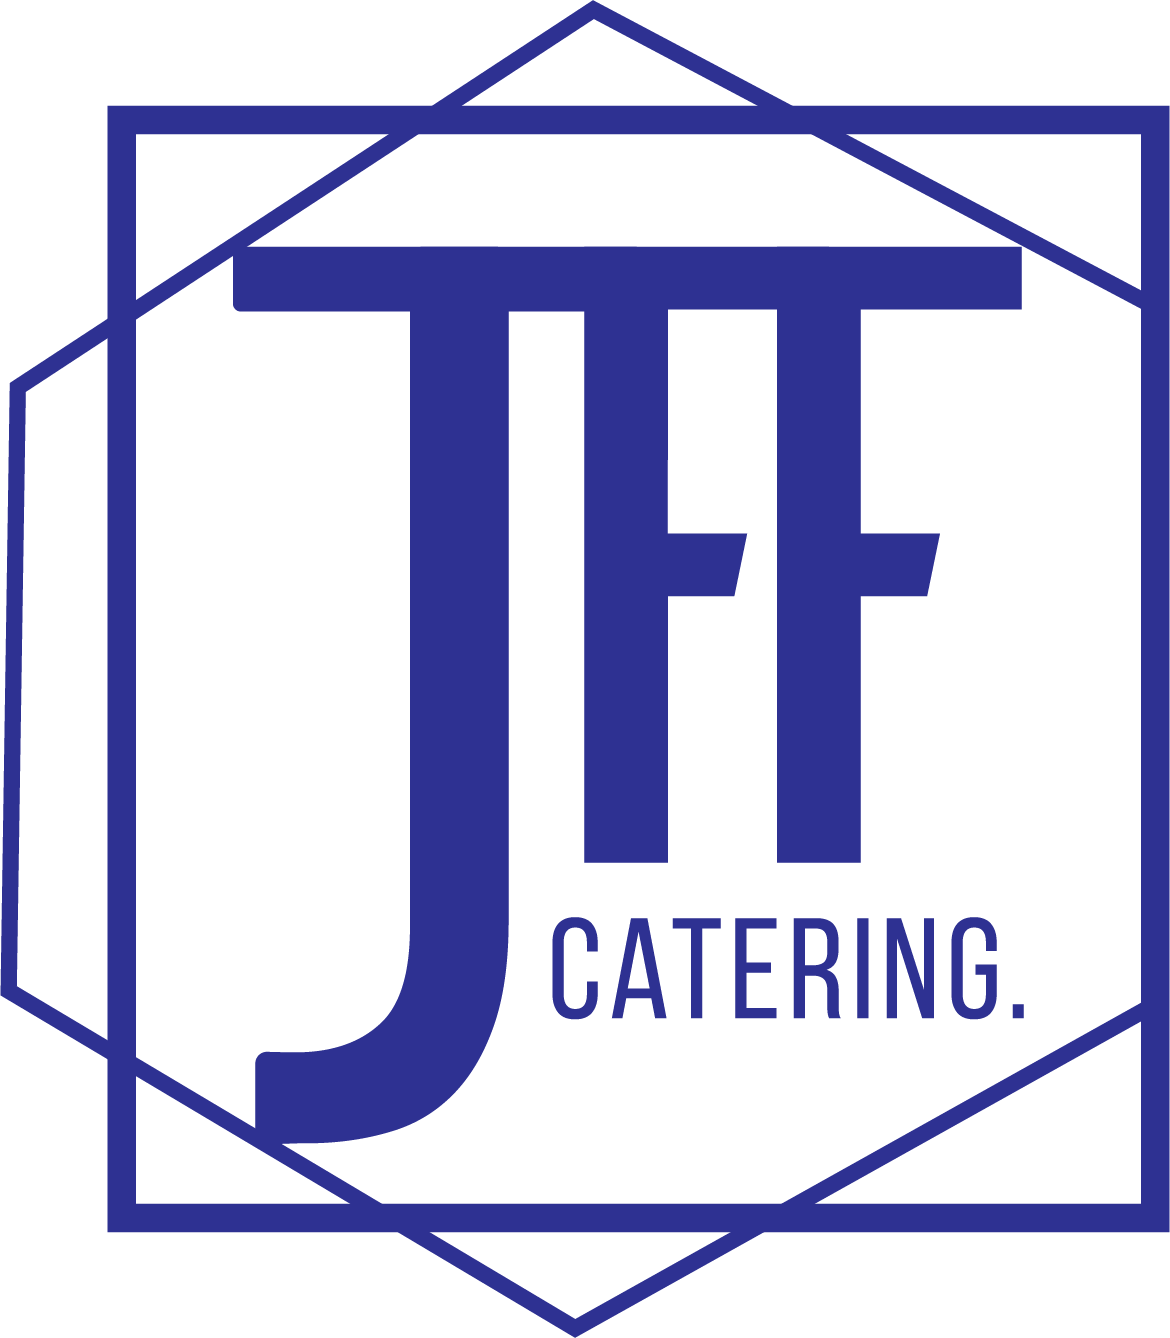 Just Fingerfoods Catering (1170x1338)